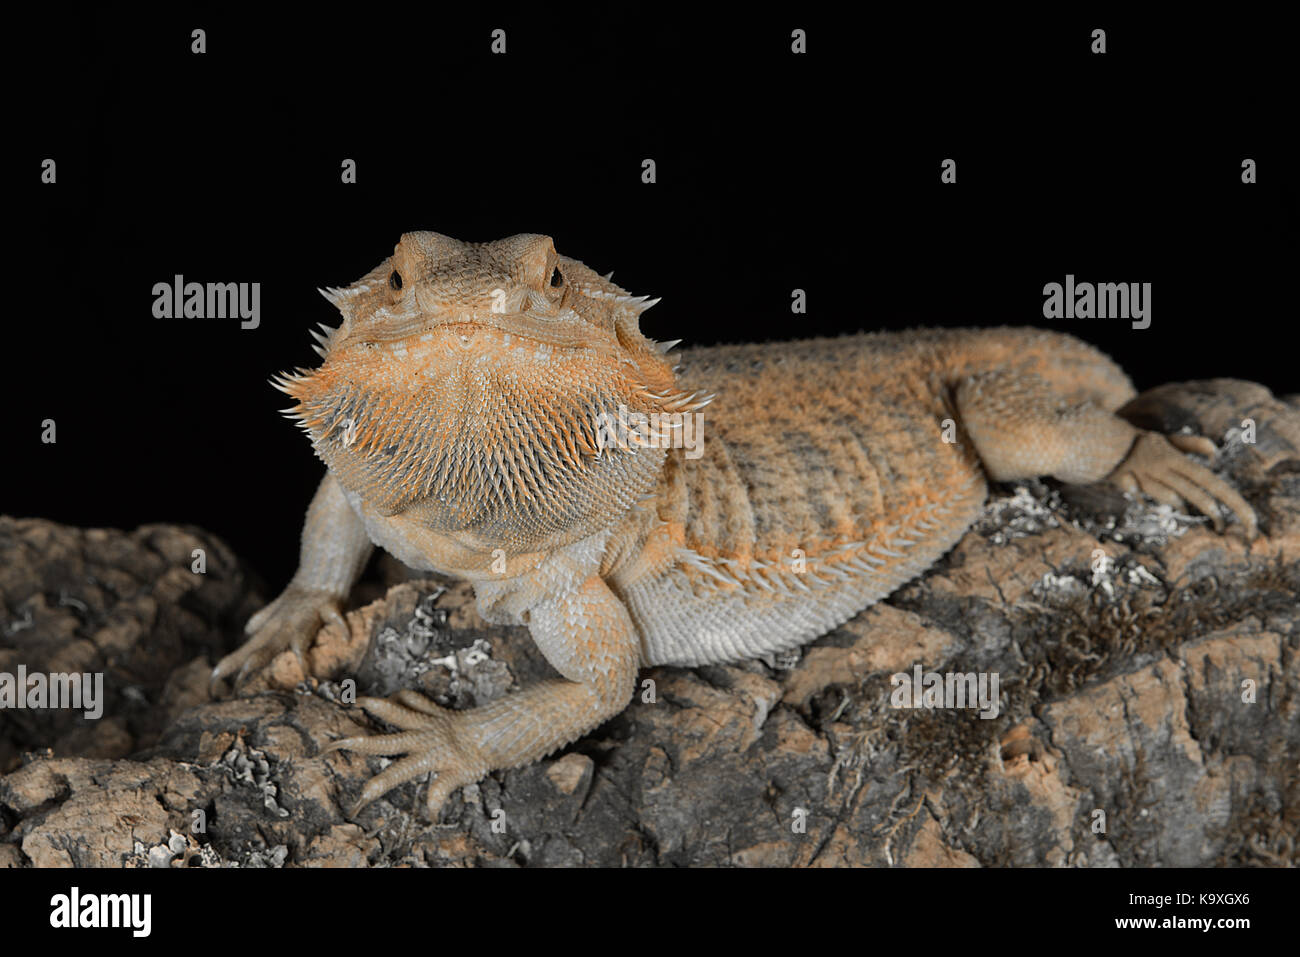 Close up portrait of a bearded dragon looking forward and staring at the camera on a black background Stock Photo